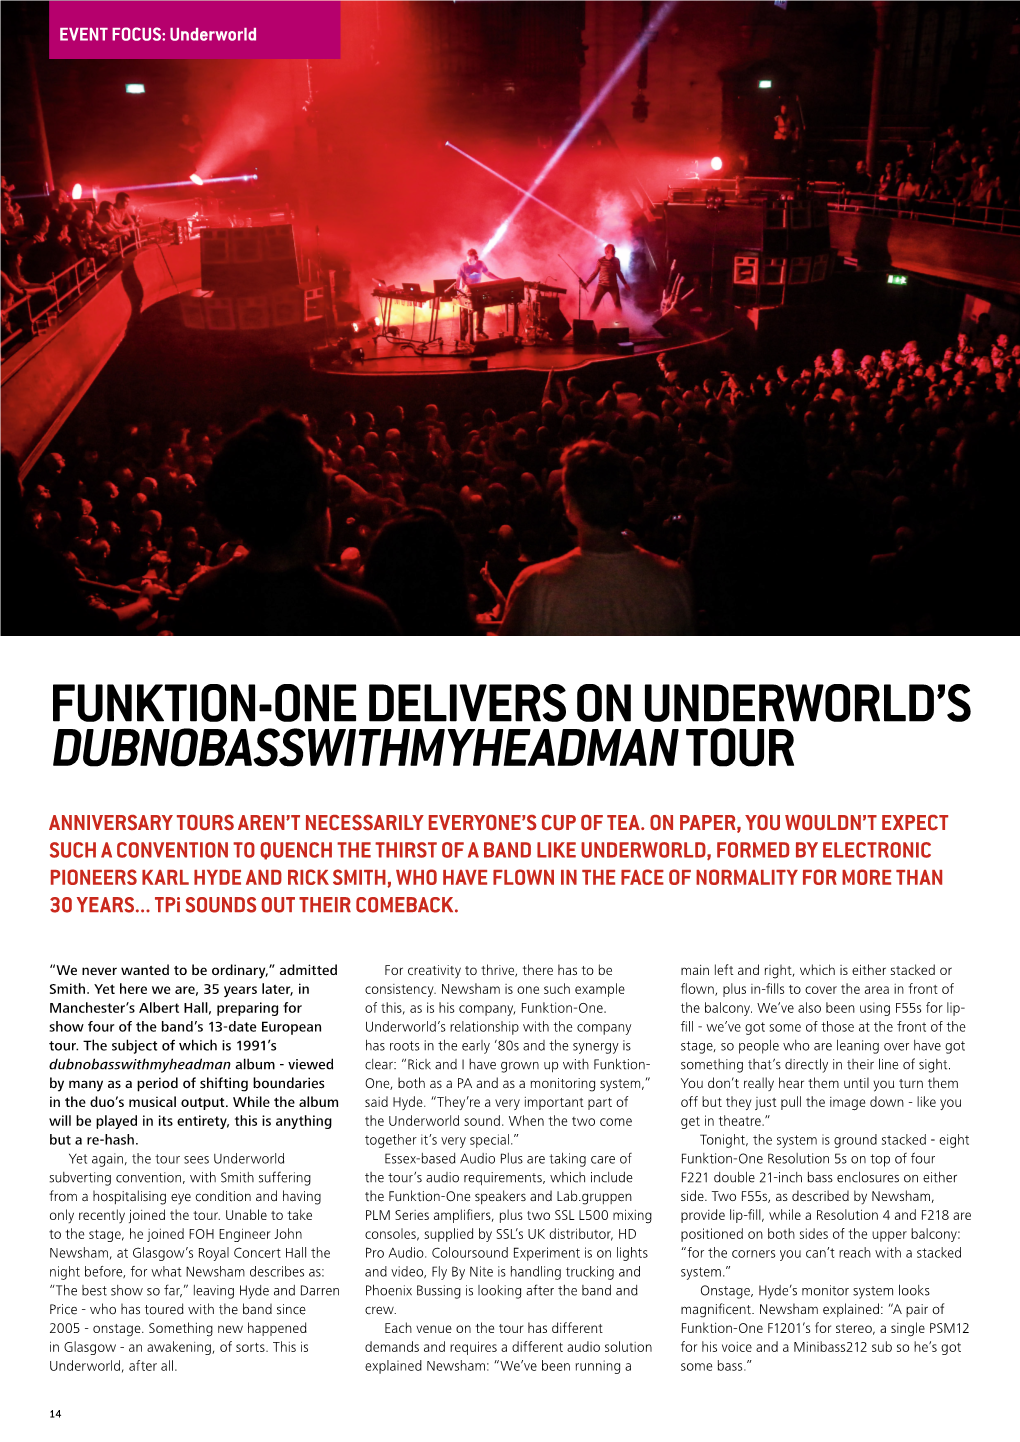 Funktion-One Delivers on Underworld's